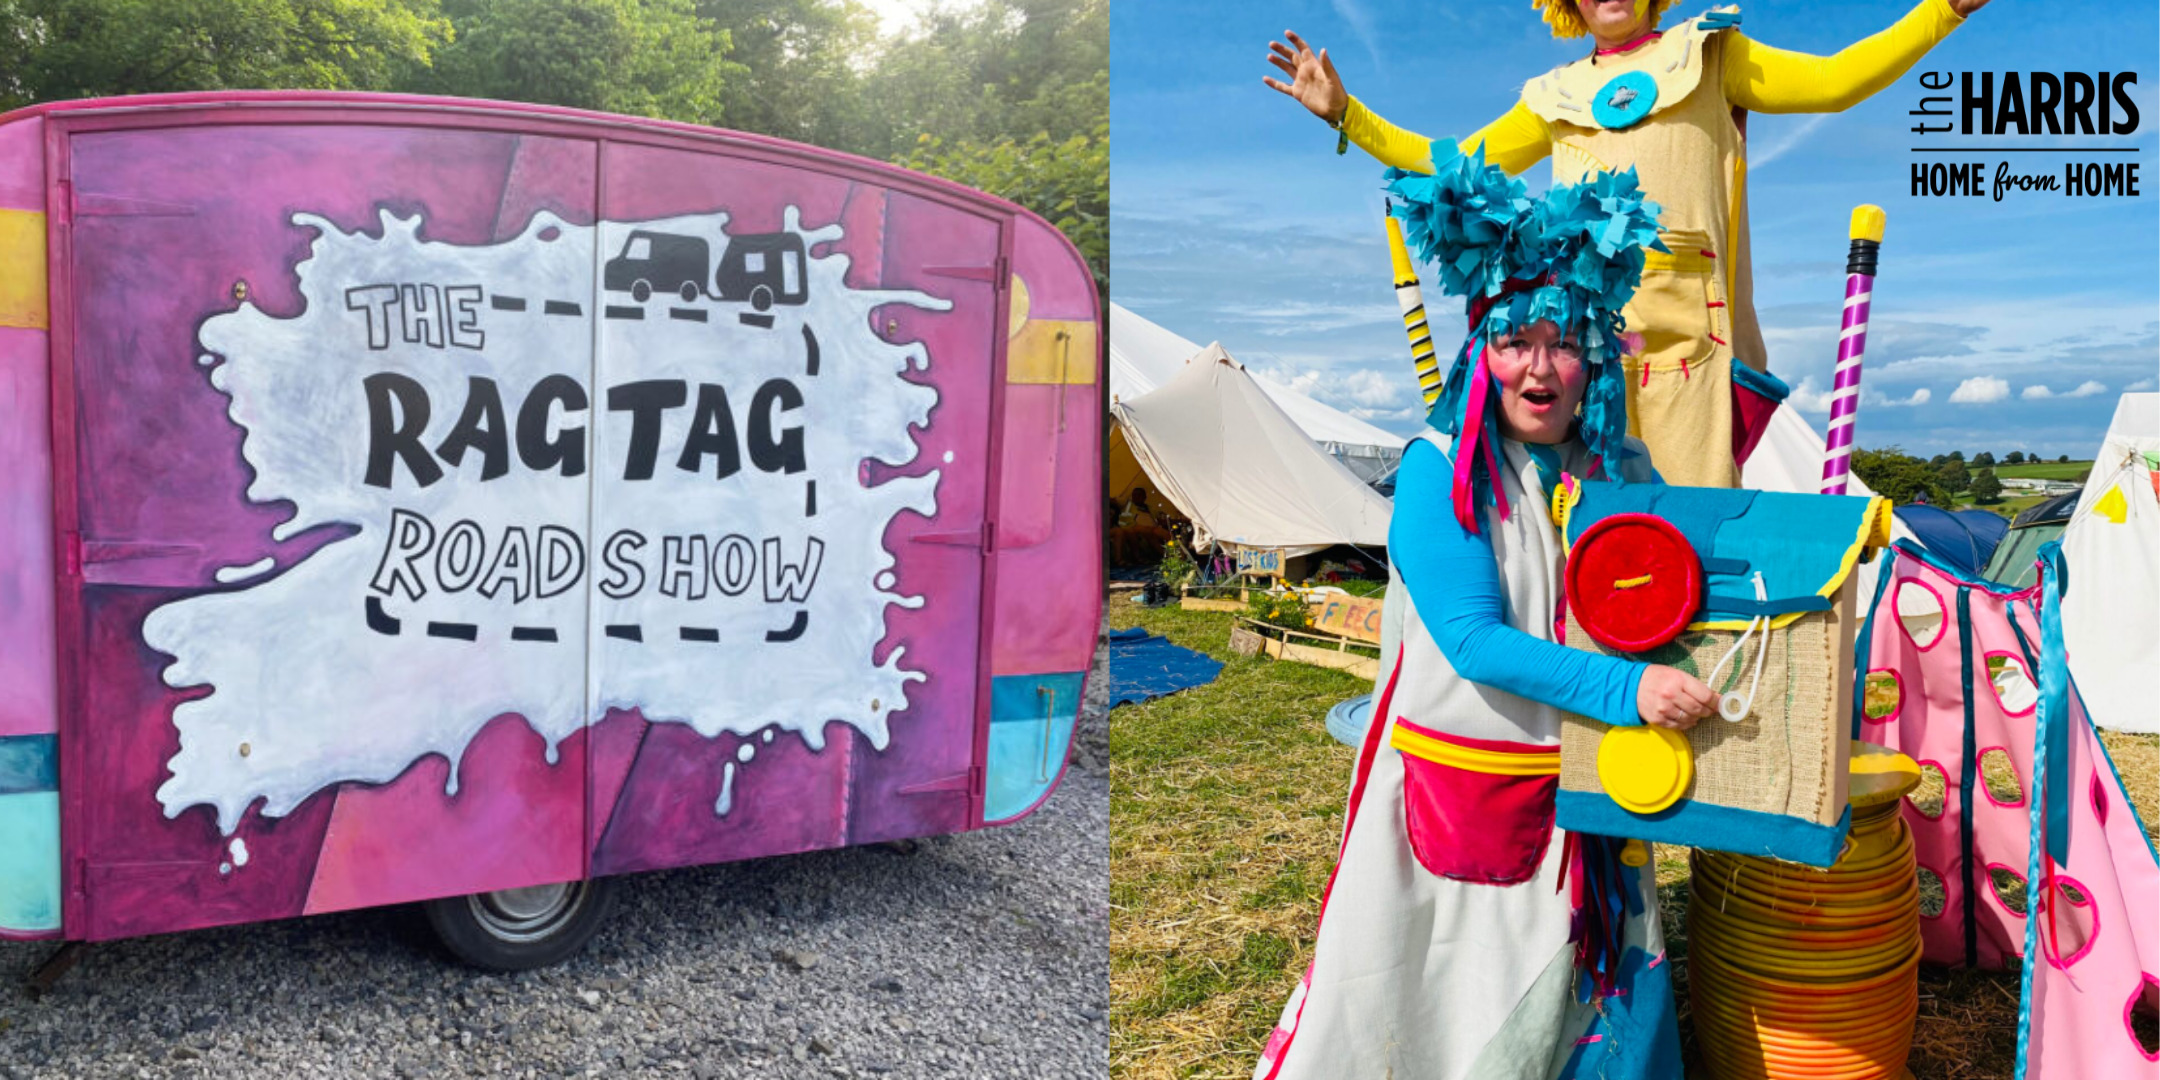 A pink trailer with The Rag Tag Roadshow written on it with black and white paint. Next to the trailer is an image of two performers in blue and yellow costumes.